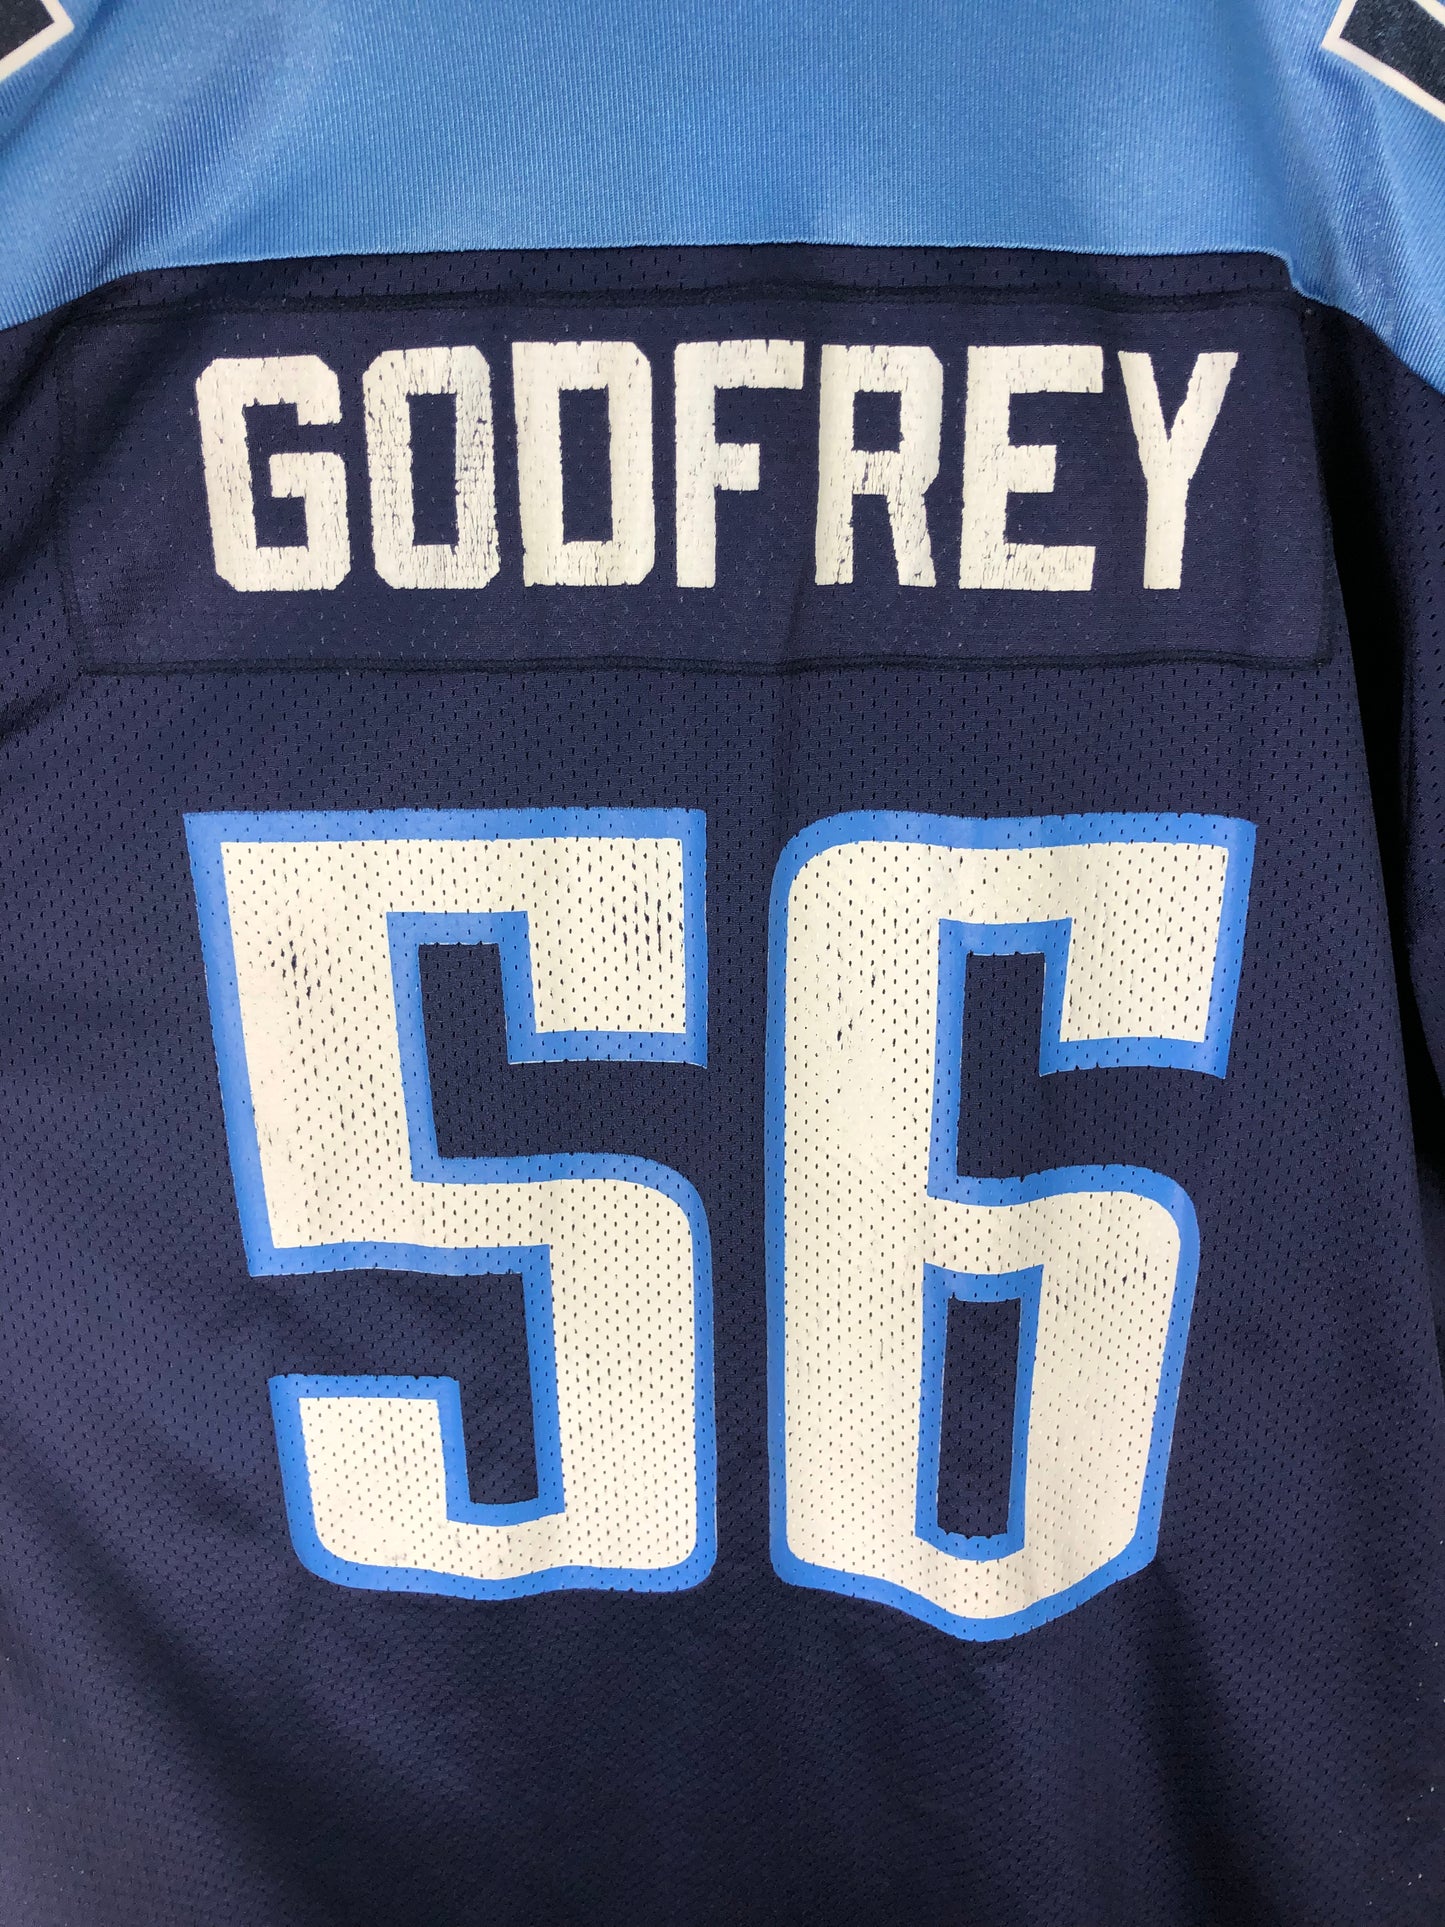 Load image into Gallery viewer, VTG Tennessee Titans Puma Randall Godfrey #56 Blue Jersey Sz XXL
